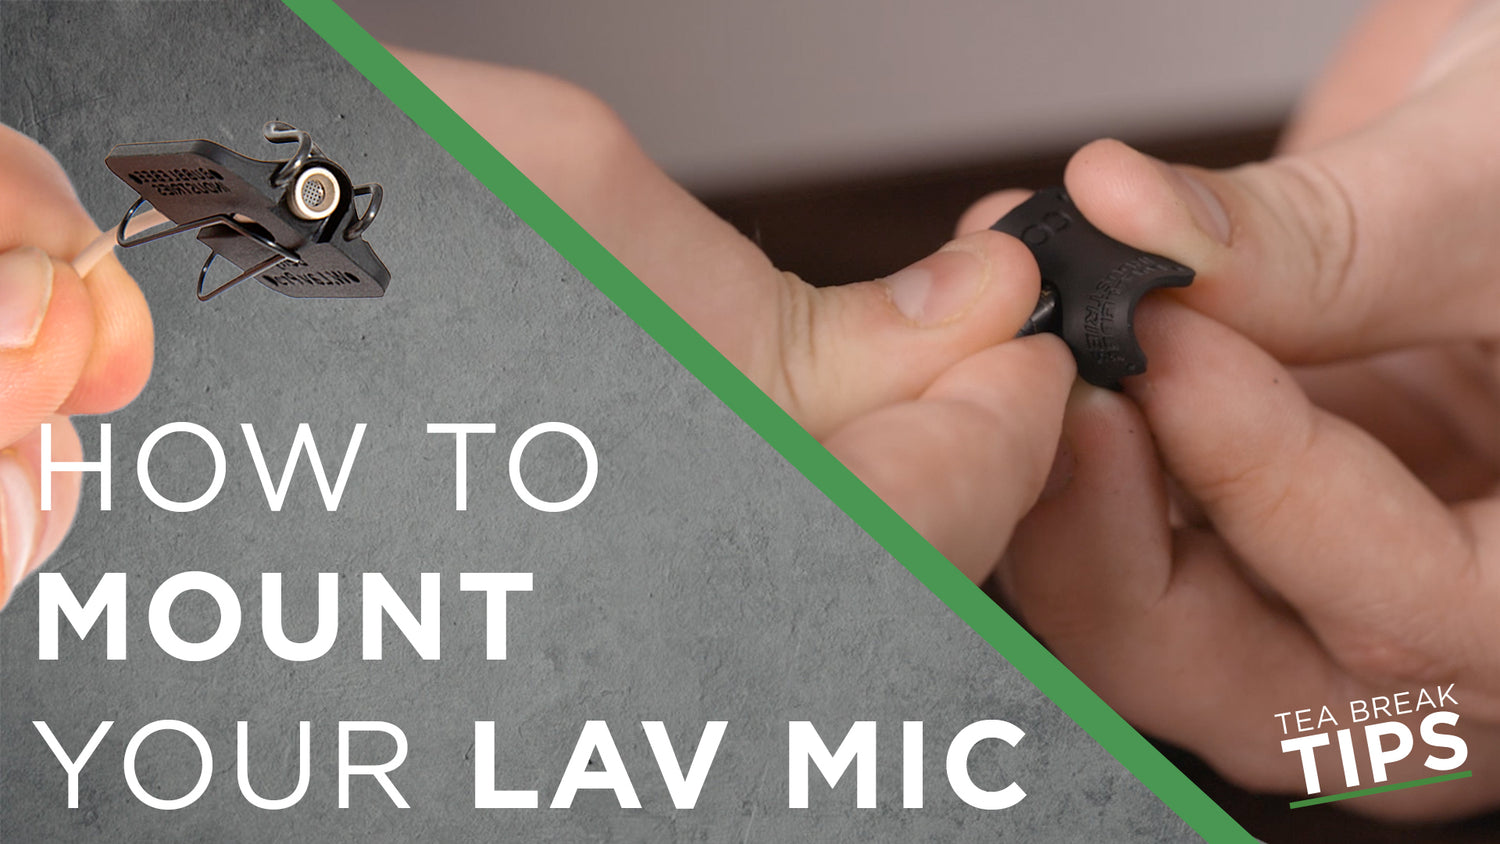 The Lav Concealer - How to Mount and Unmount your Lav Mic quickly and easily